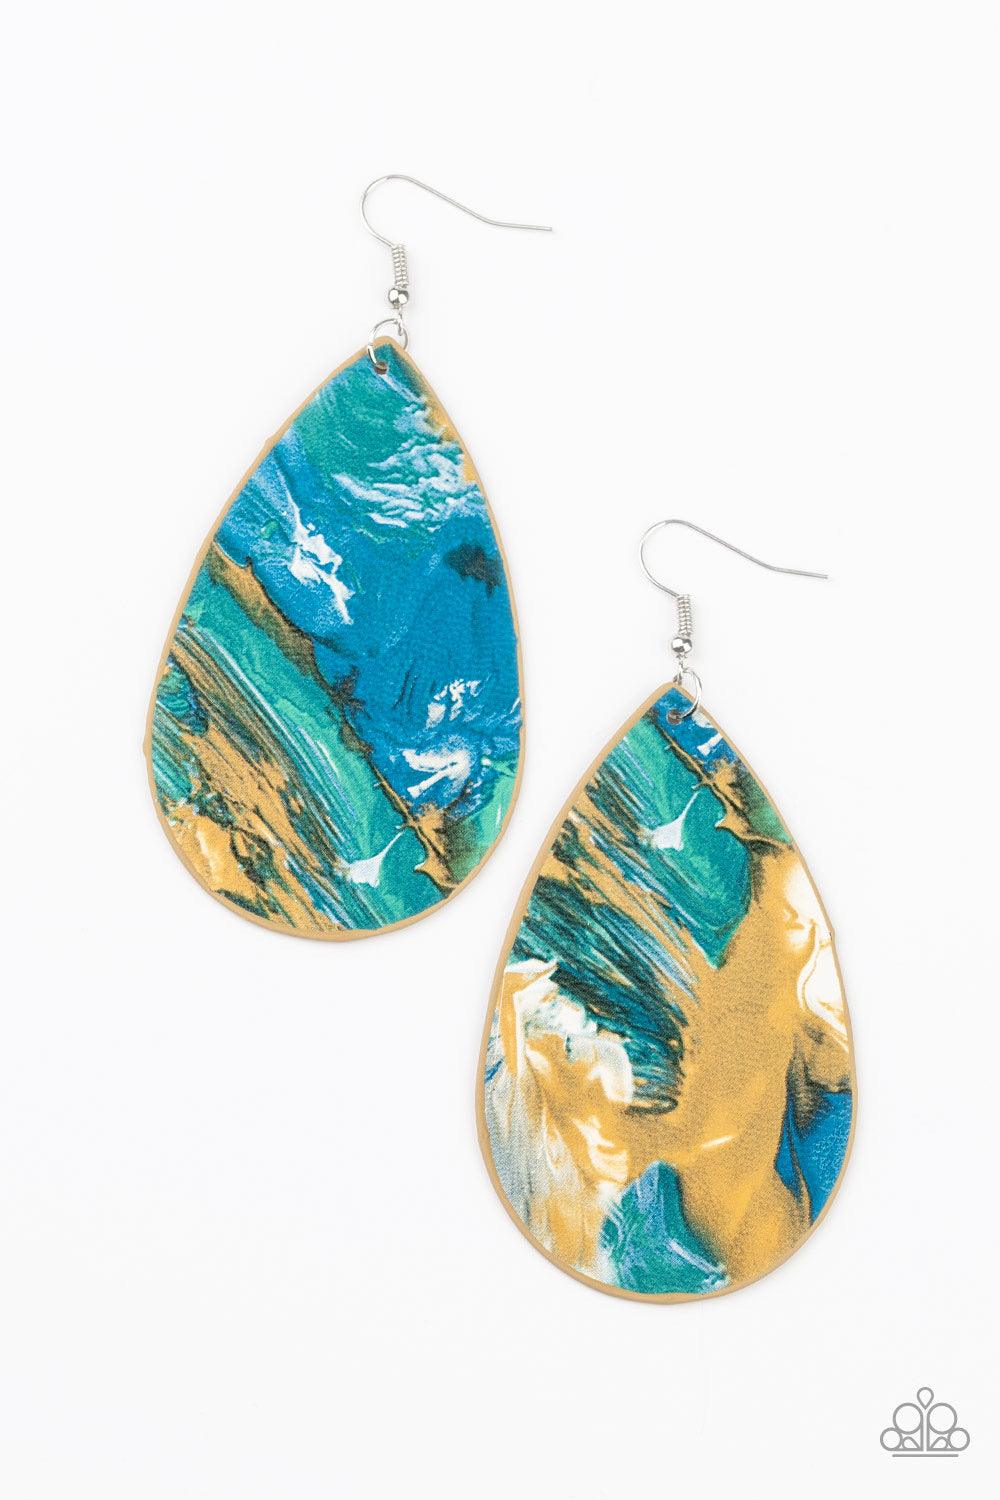 Paparazzi Accessories Mesmerizing Mosaic - Multi Featuring a mosaic of blue, brown, green, and white swirls, a pair of mismatched leathery teardrops swing from the ears for a seasonal flair. Earring attaches to a standard fishhook fitting. Jewelry